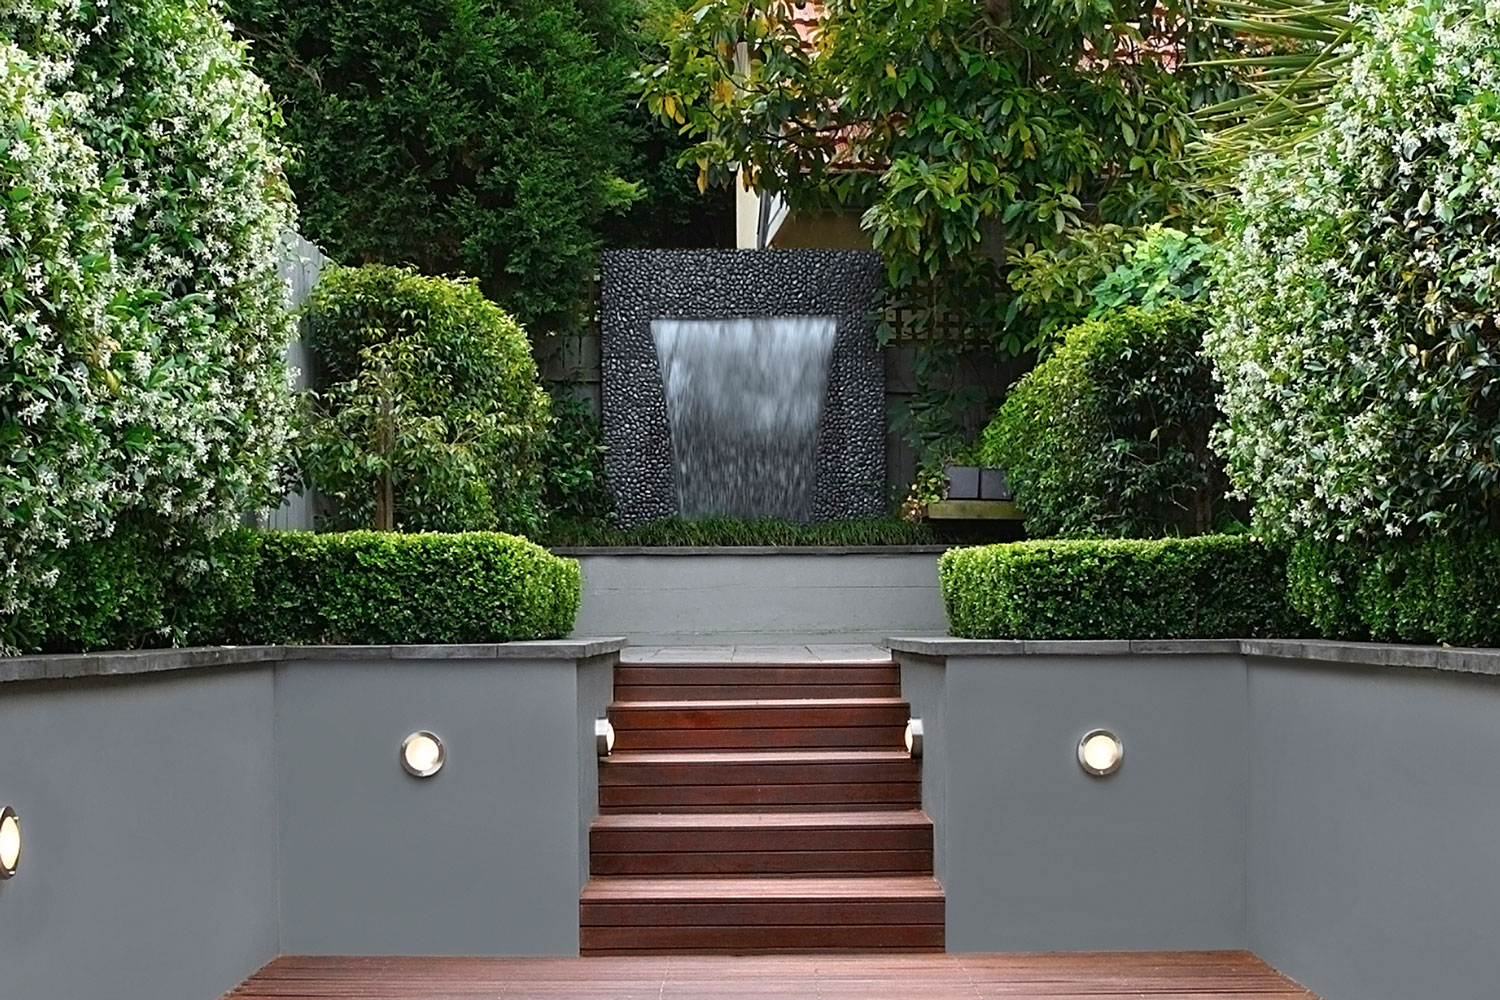 8 water feature ideas to transform your outdoor garden ...